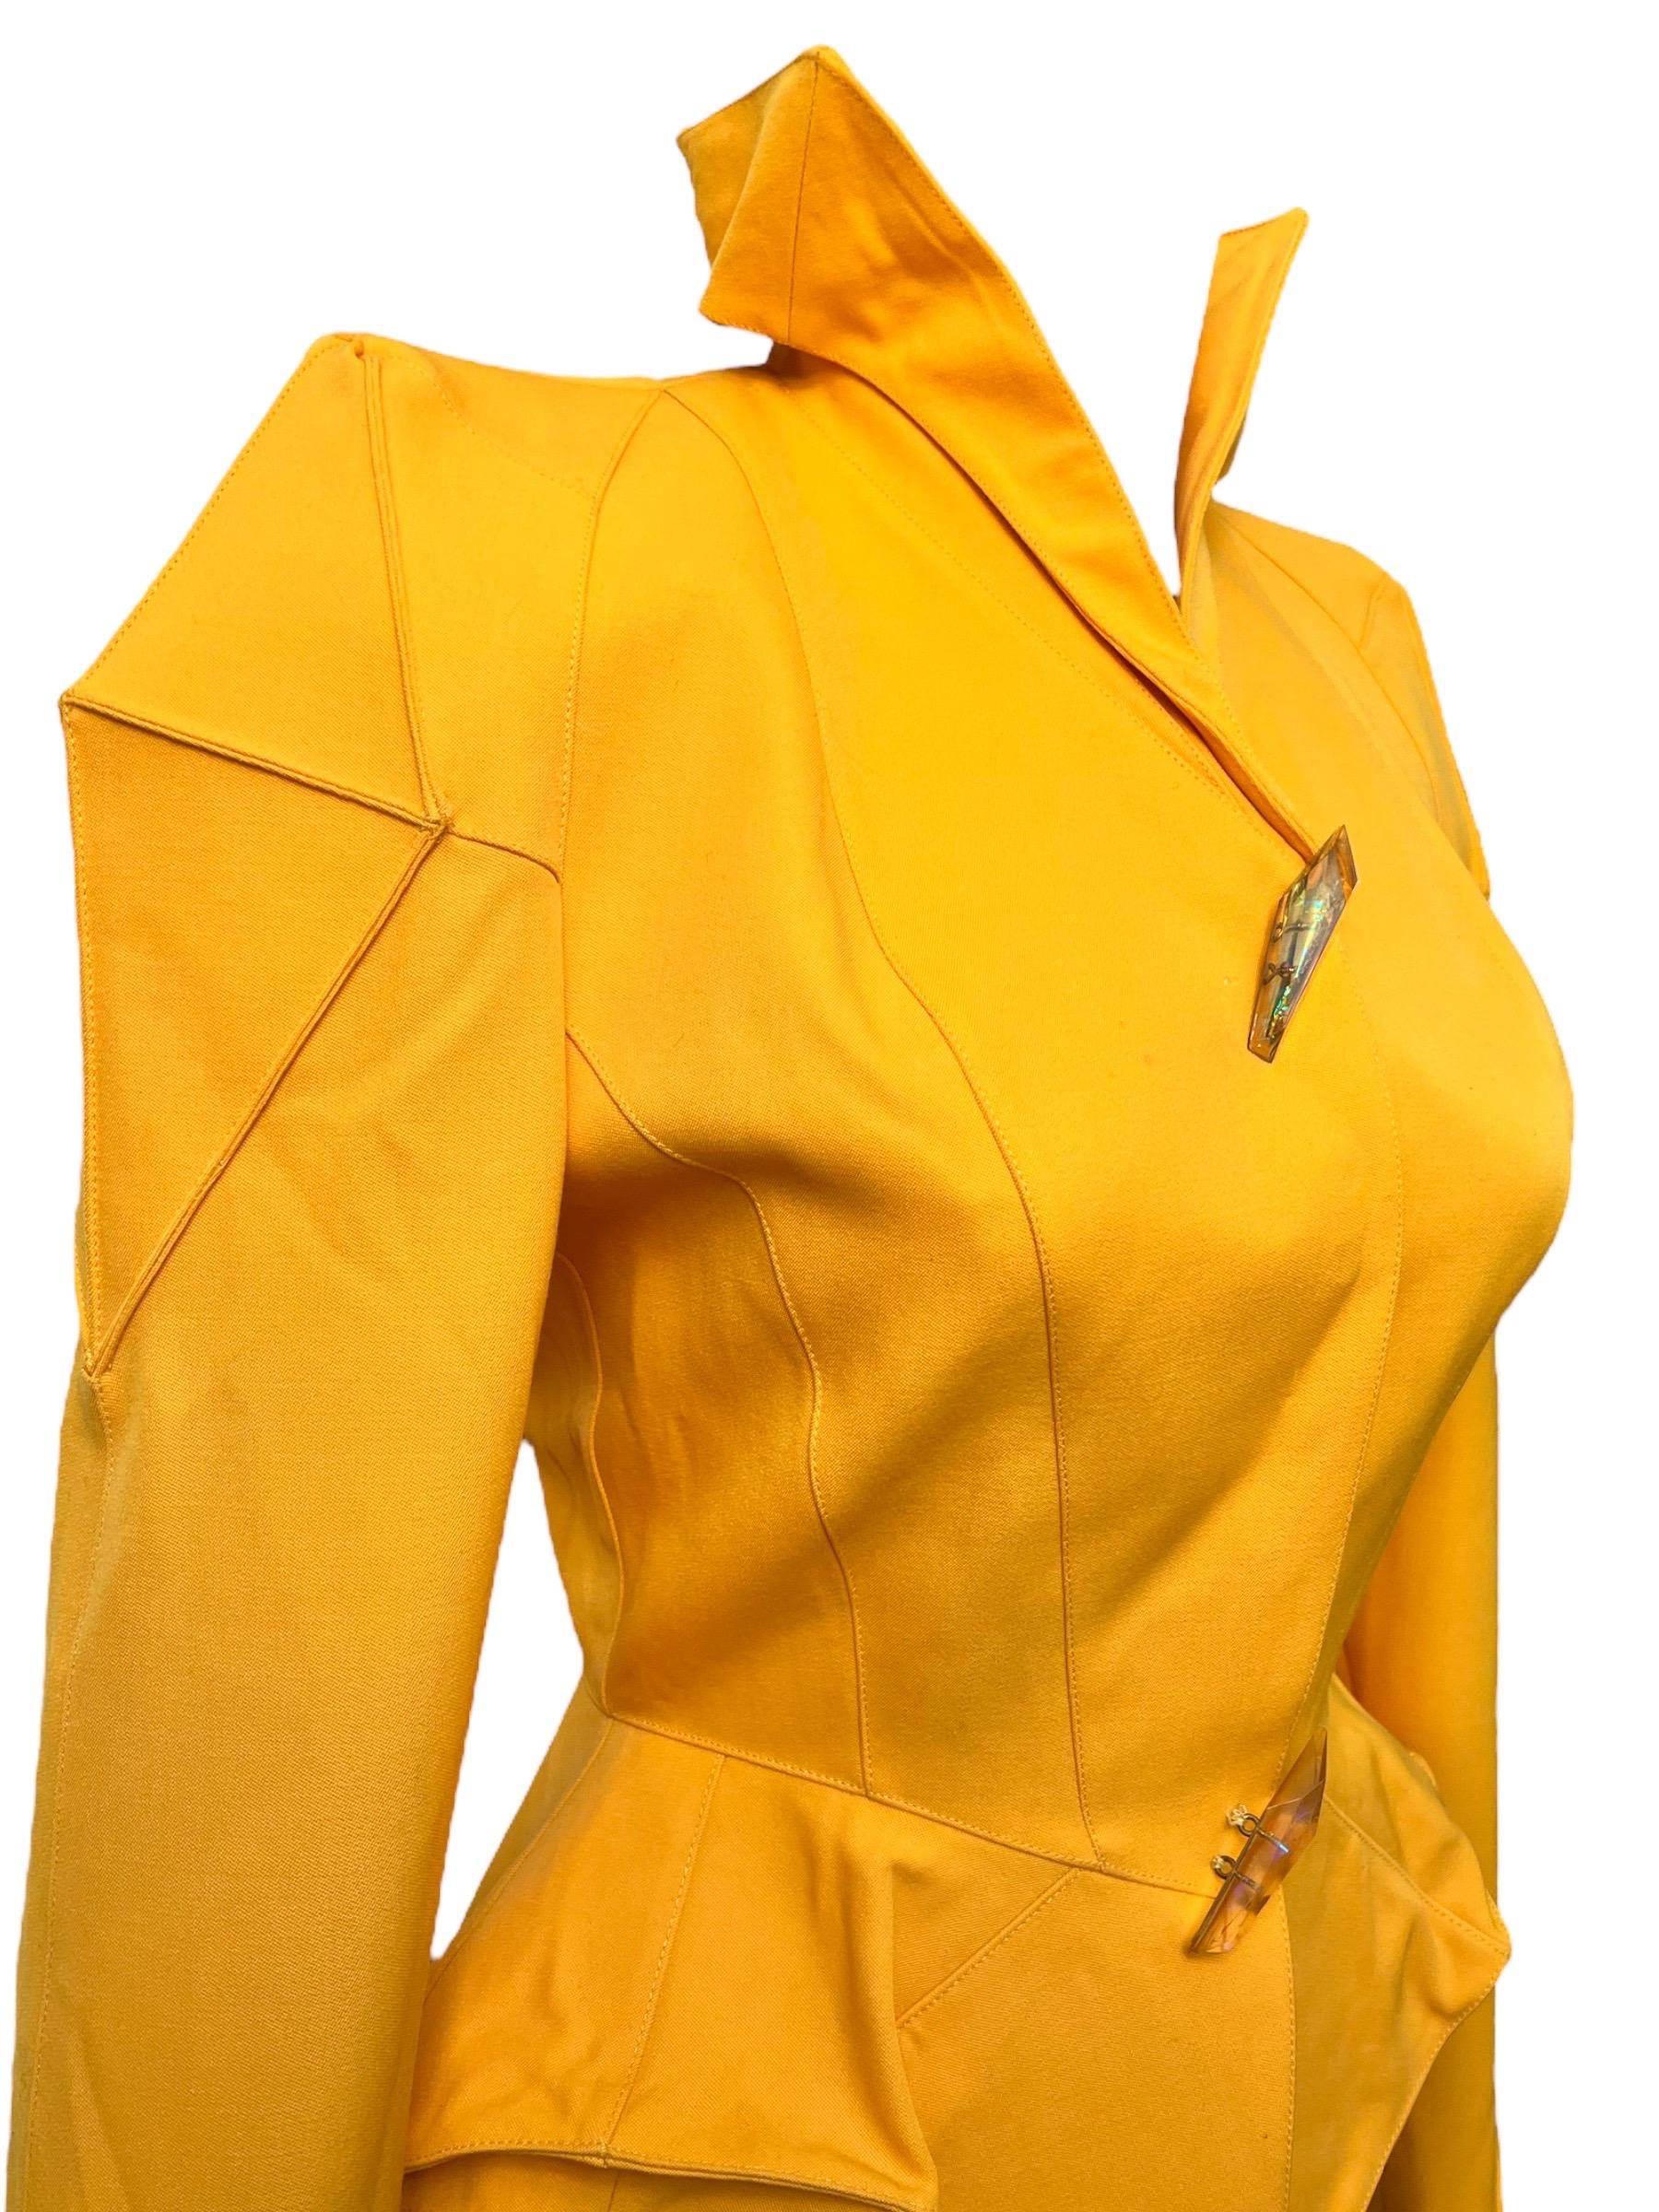 F/W 1991 Thierry Mugler Yellow Sculptural Skirt Suit For Sale 7